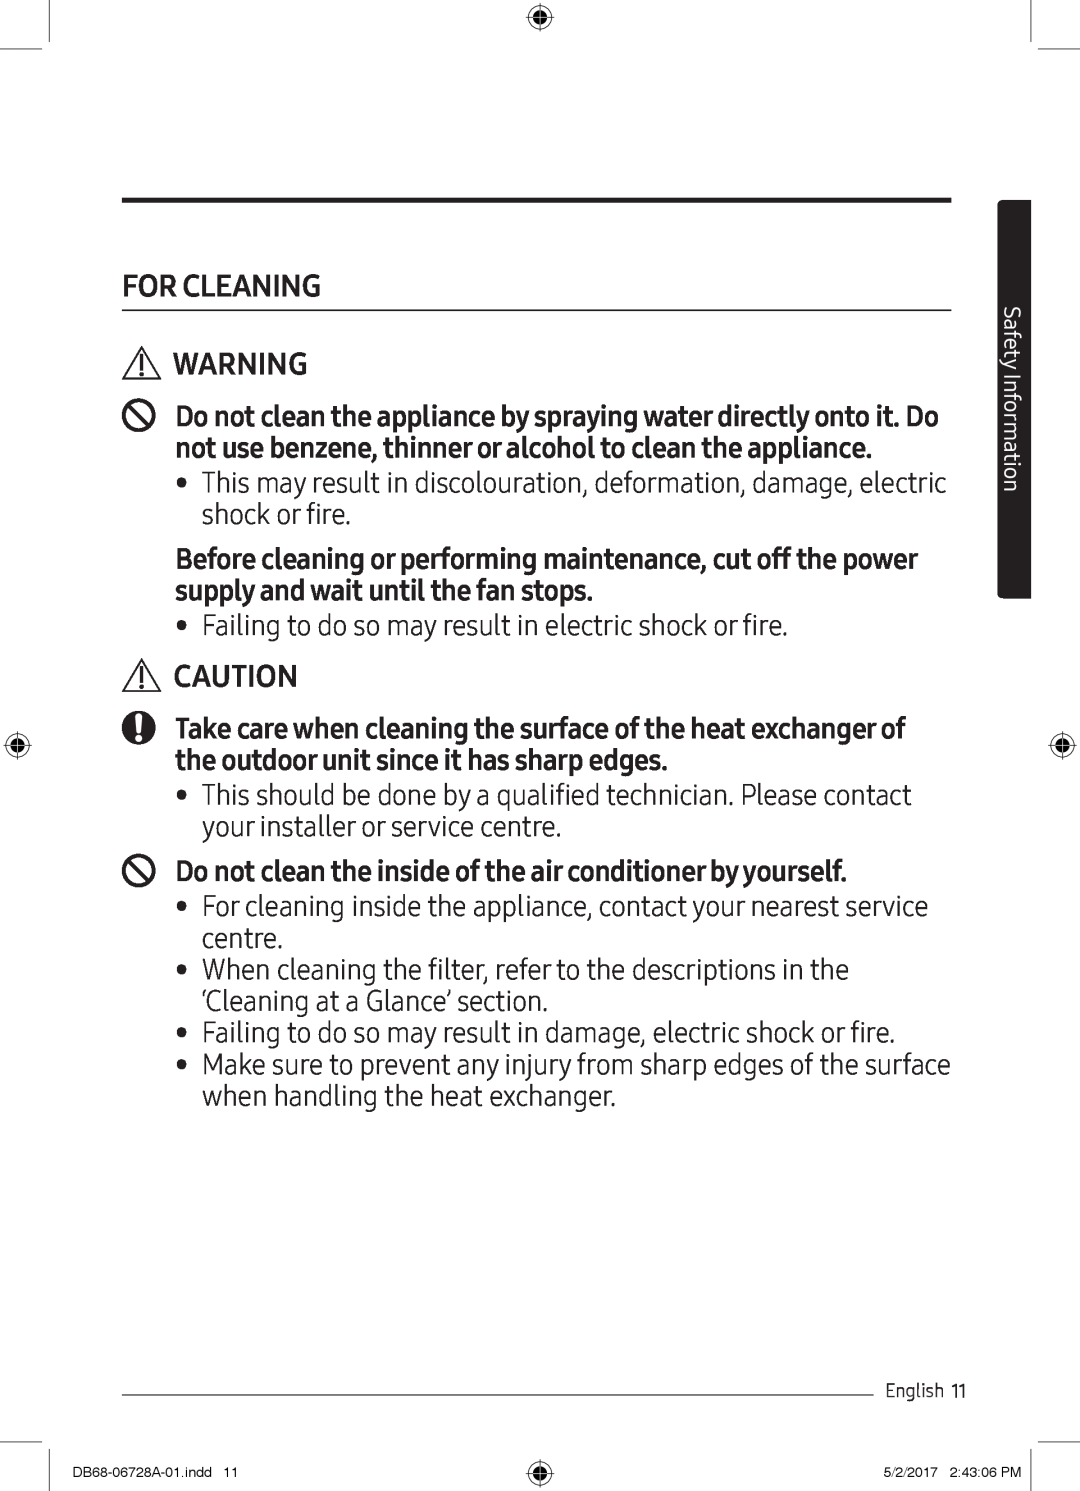 Samsung AR09MSPXAWKNEU, AR12MSPXASINEU manual For Cleaning, Do not clean the inside of the air conditioner by yourself 